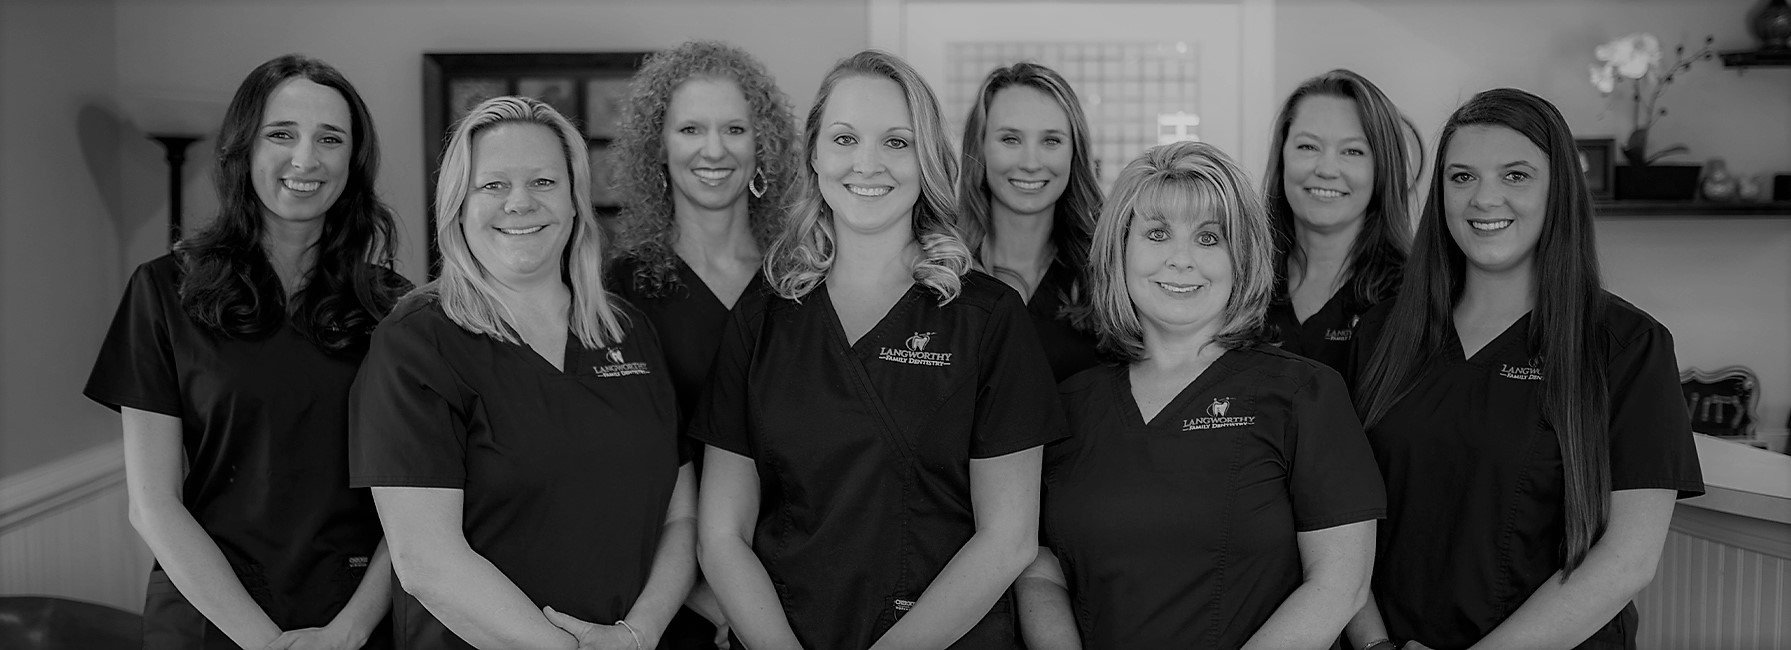 The Langworthy Family Dentistry team